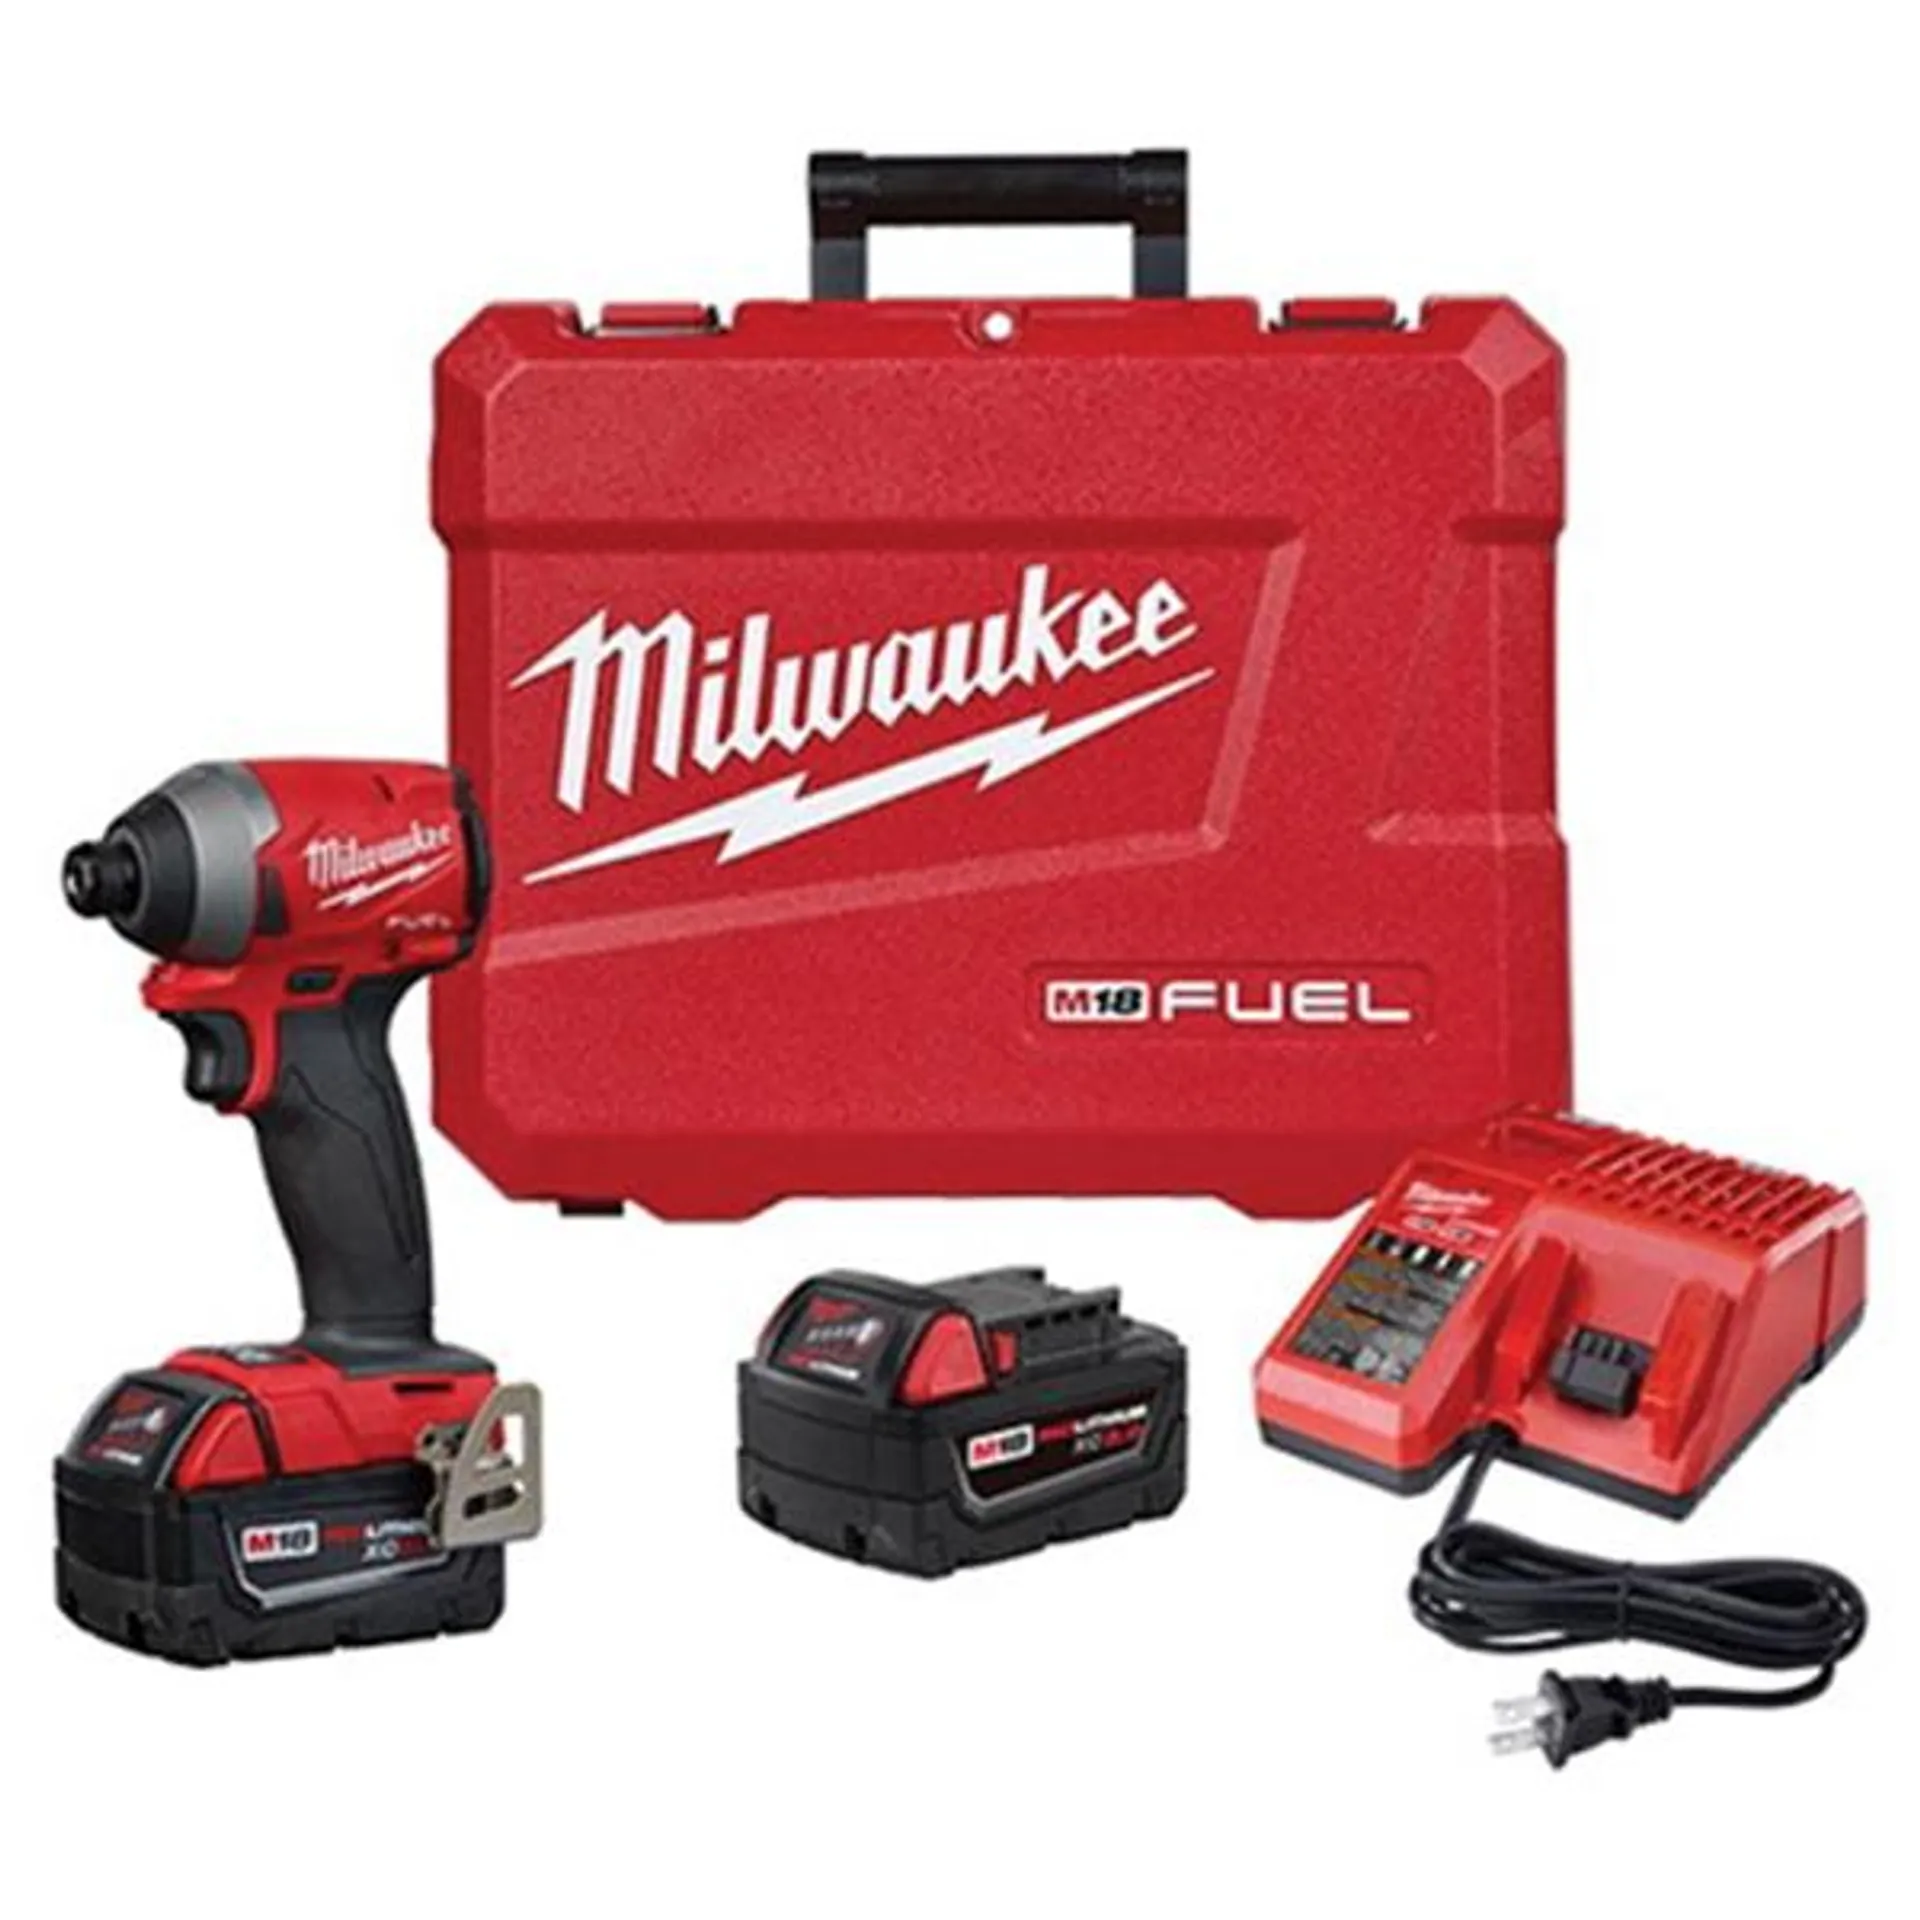 2853-22 Impact Driver Kit, Battery Included, 18 V, 5 Ah, 1/4 in Drive, Hex Drive, 4300 ipm